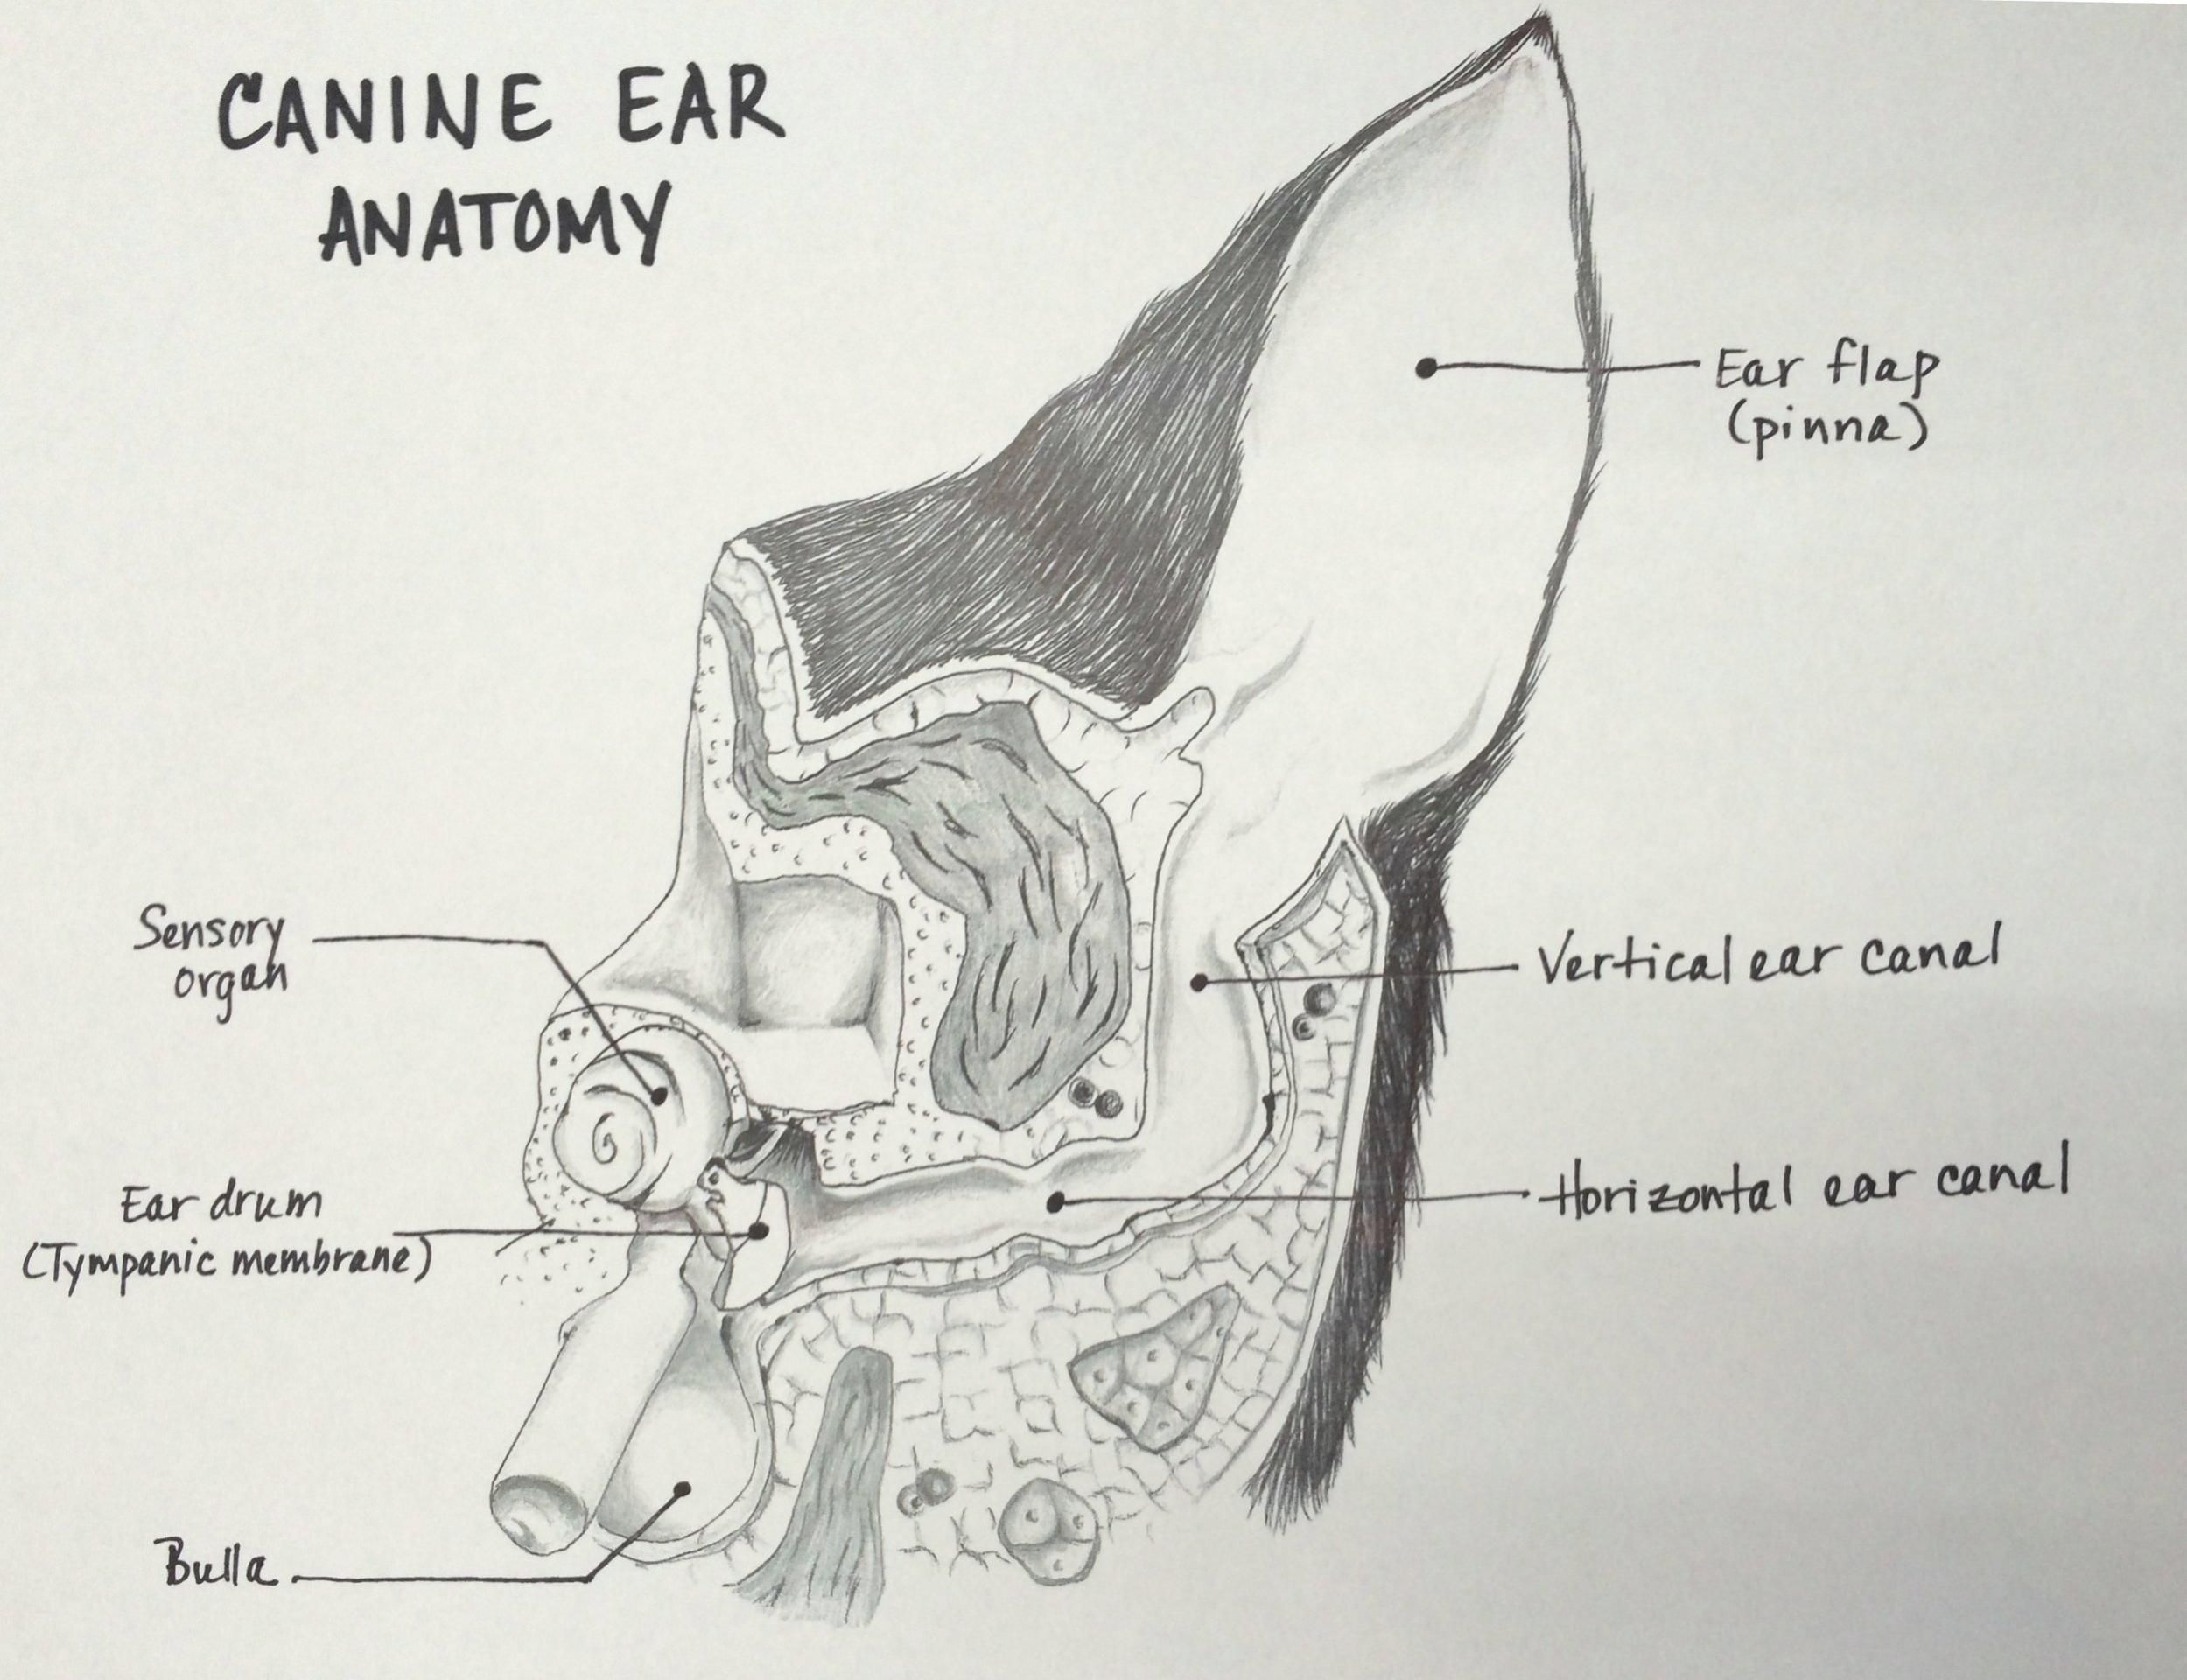 Diagram of a canine ear canal